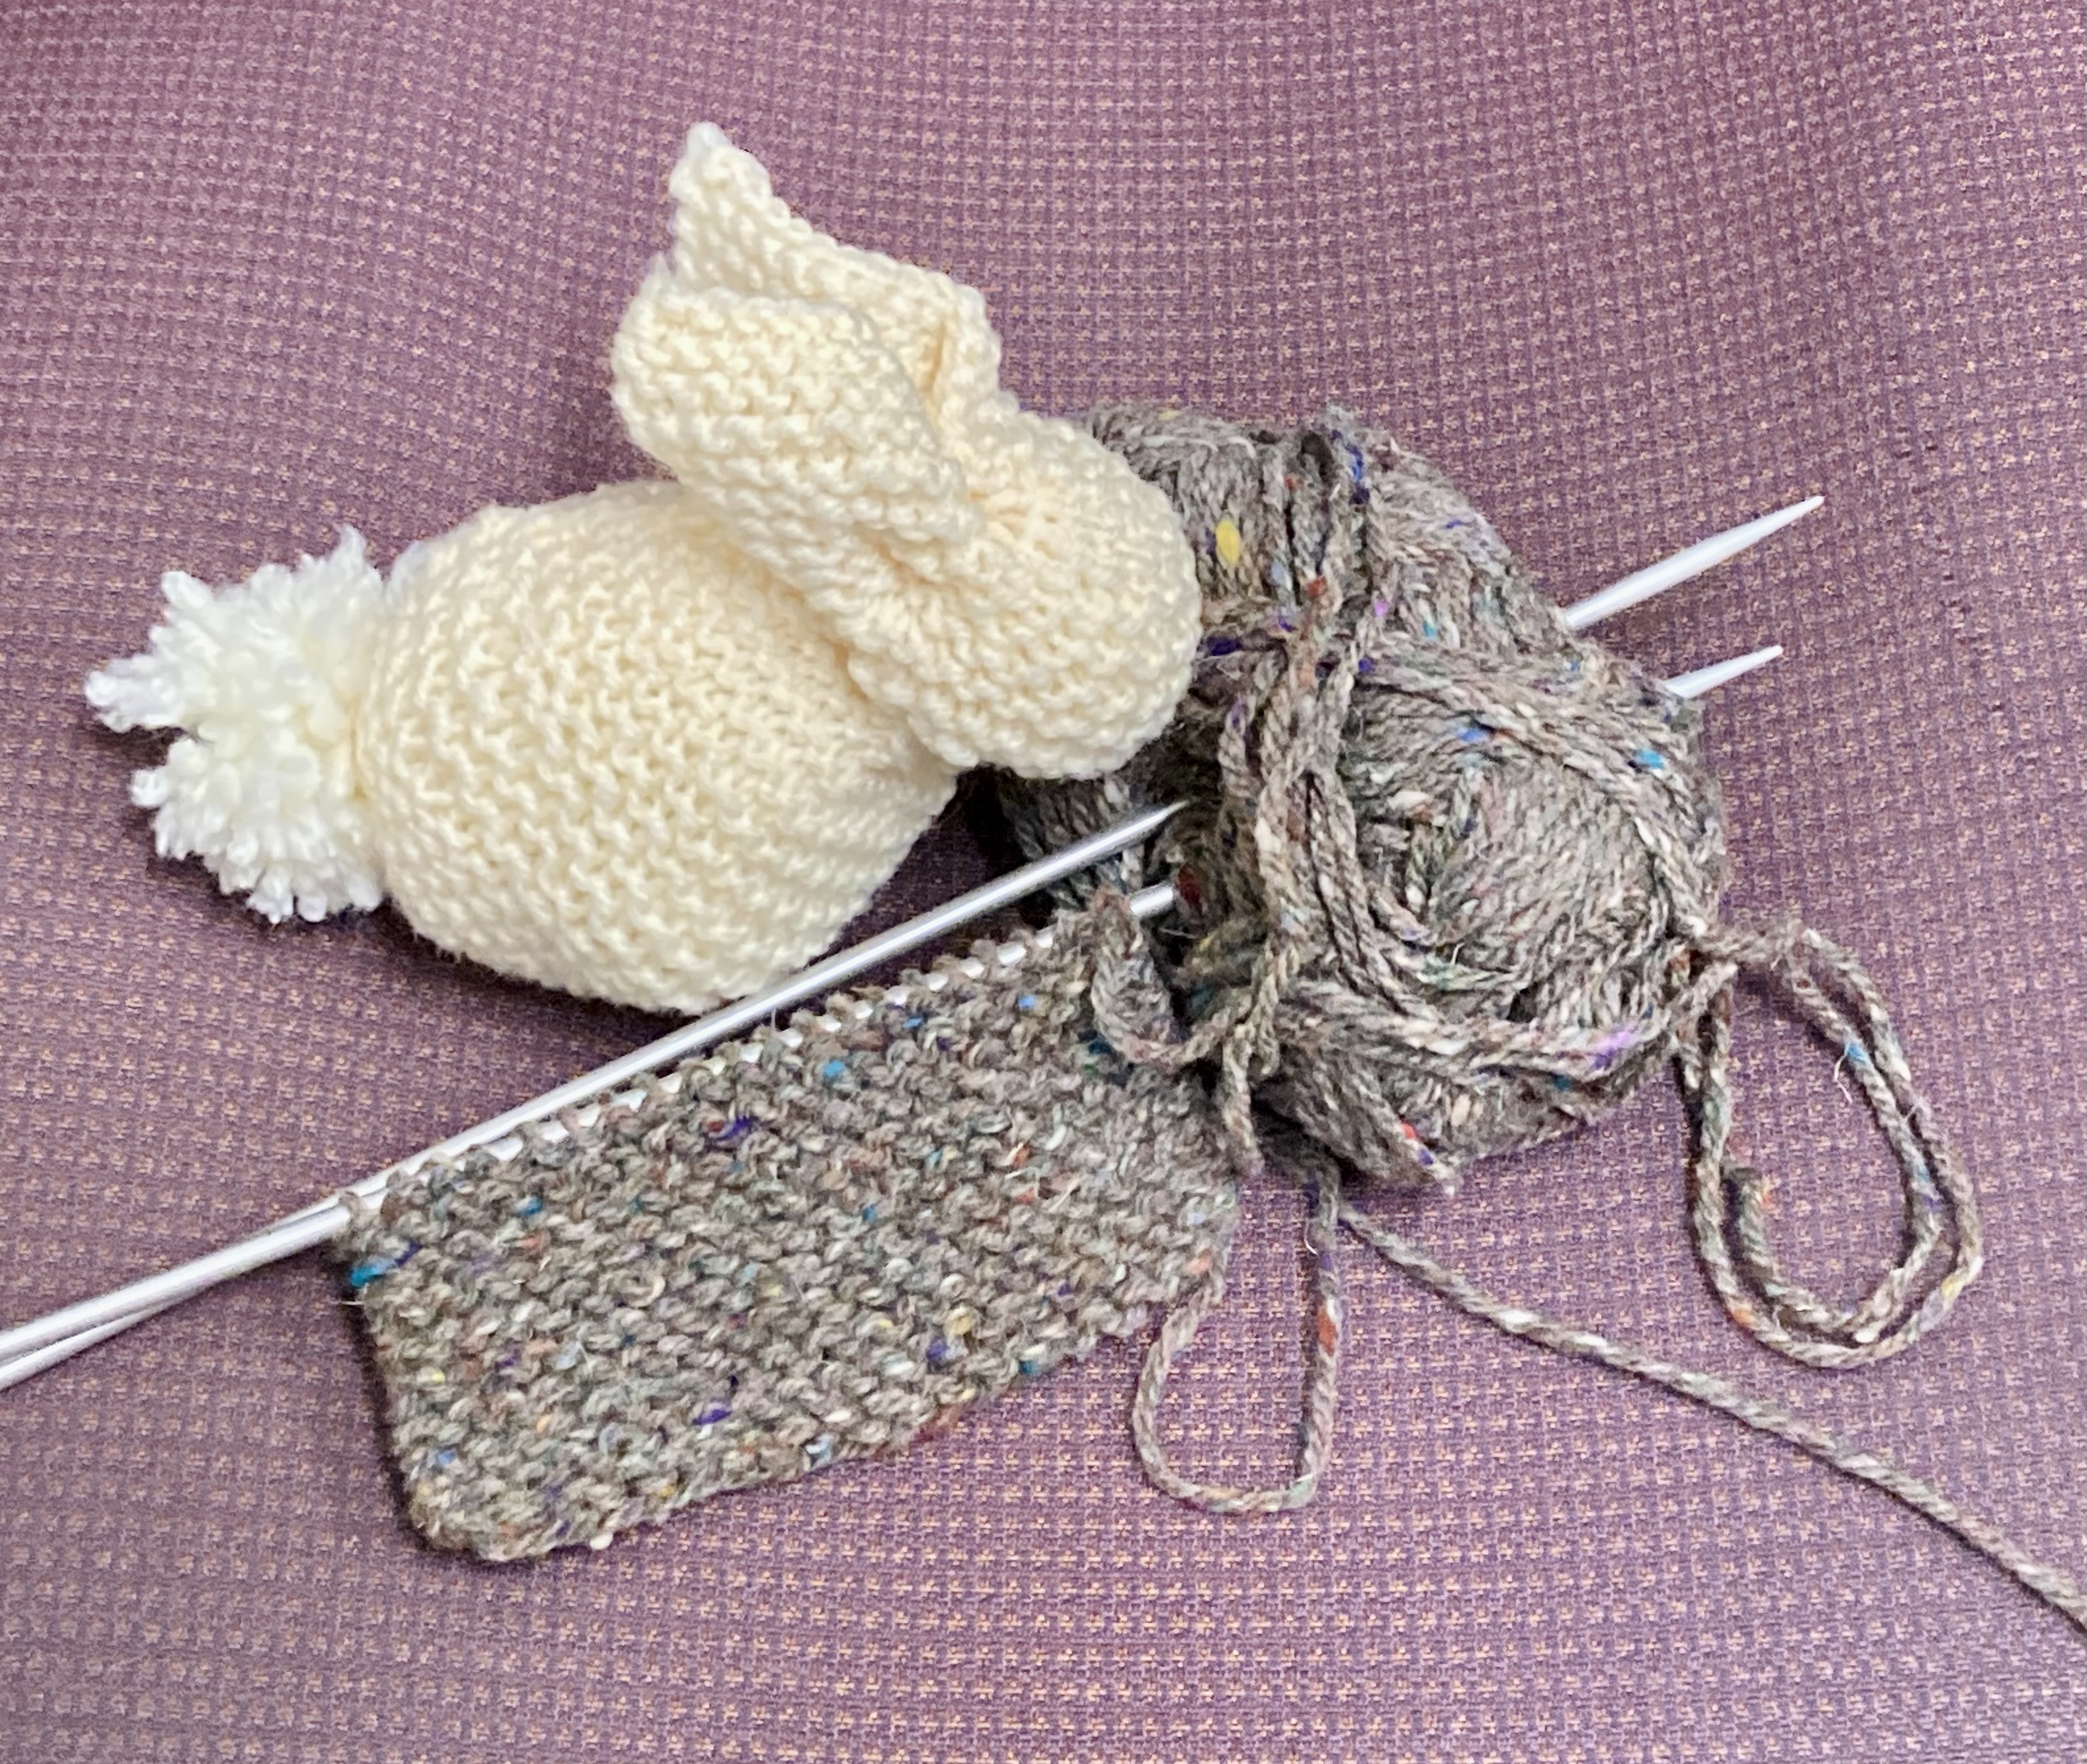 A cream colored knit bunny sits next to a knitting project on a pair of needles stabbed into gray yarn.